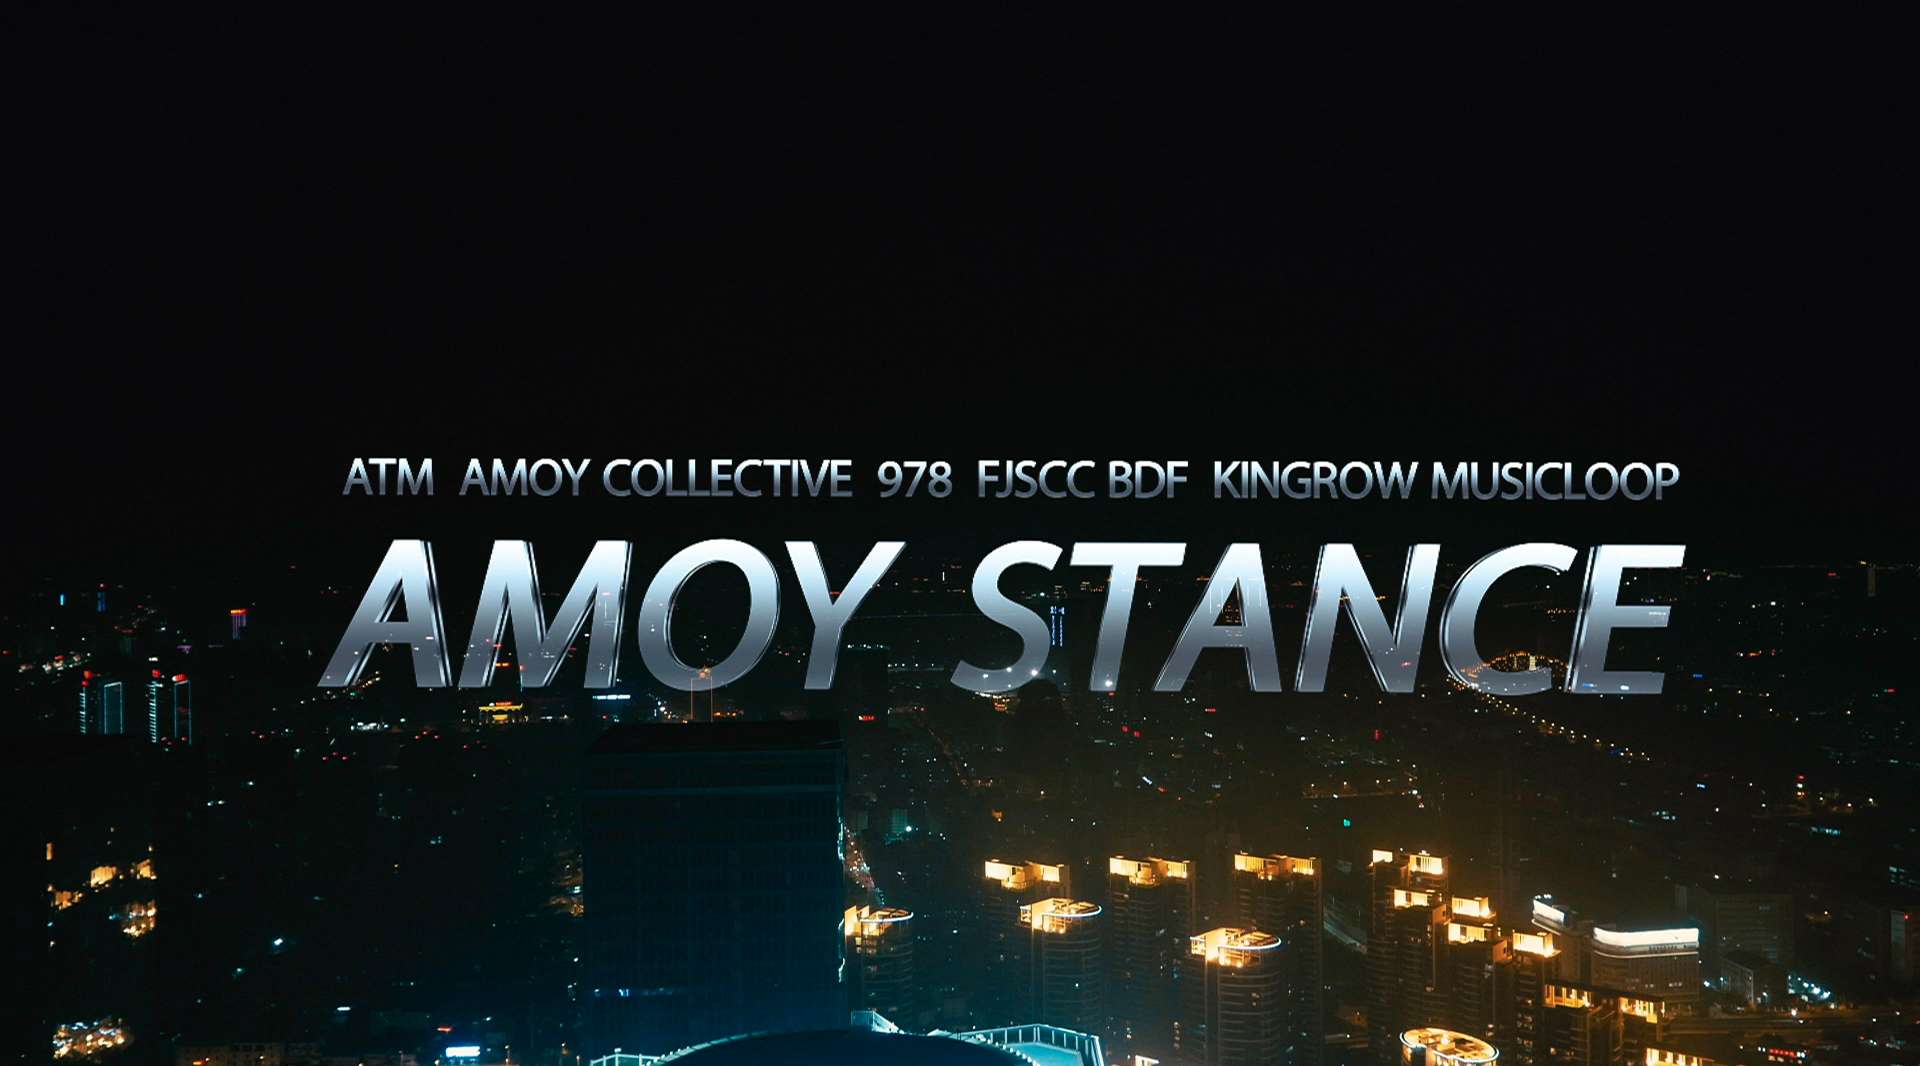 AMOY STANCE 2016/ATM/AMOY COLLECTIVE